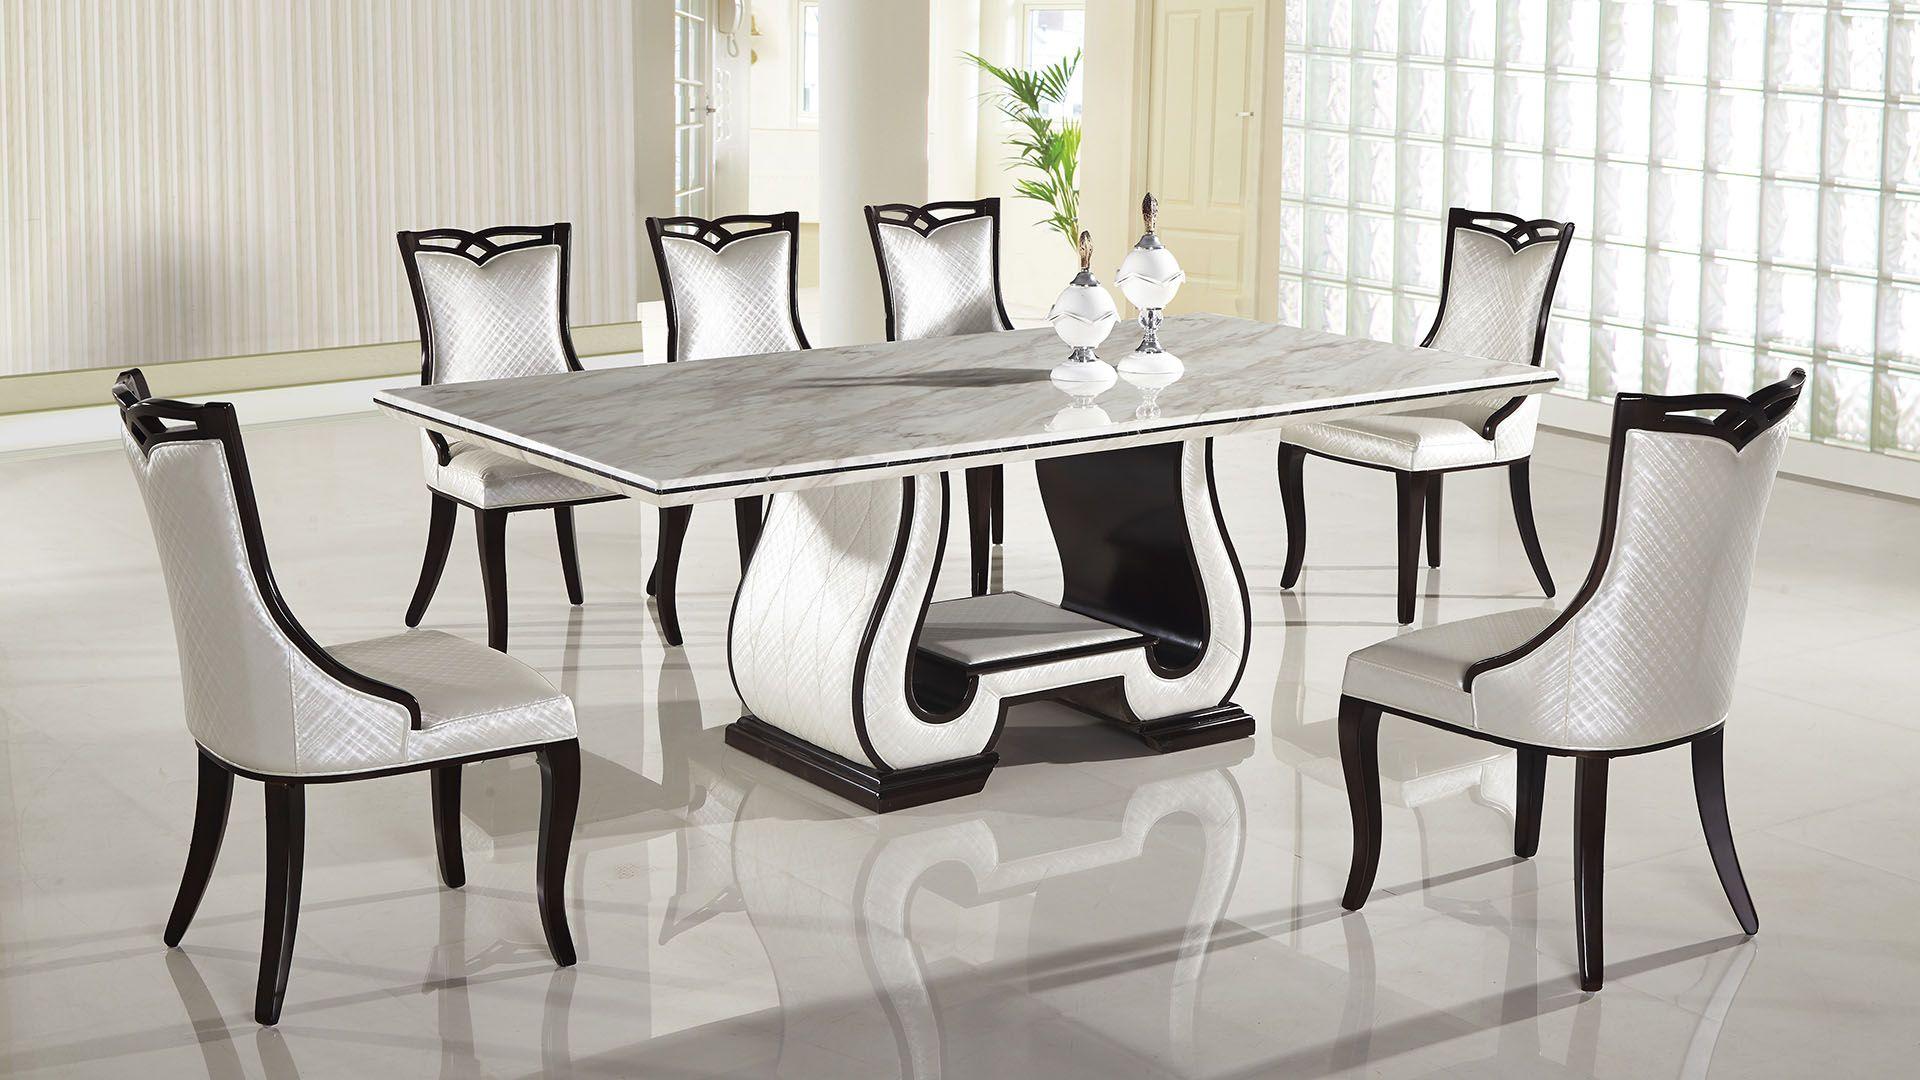 Modern Dining Table Set DT-H901 / CK-H1212 DT-H901-7PC in White, Black PU